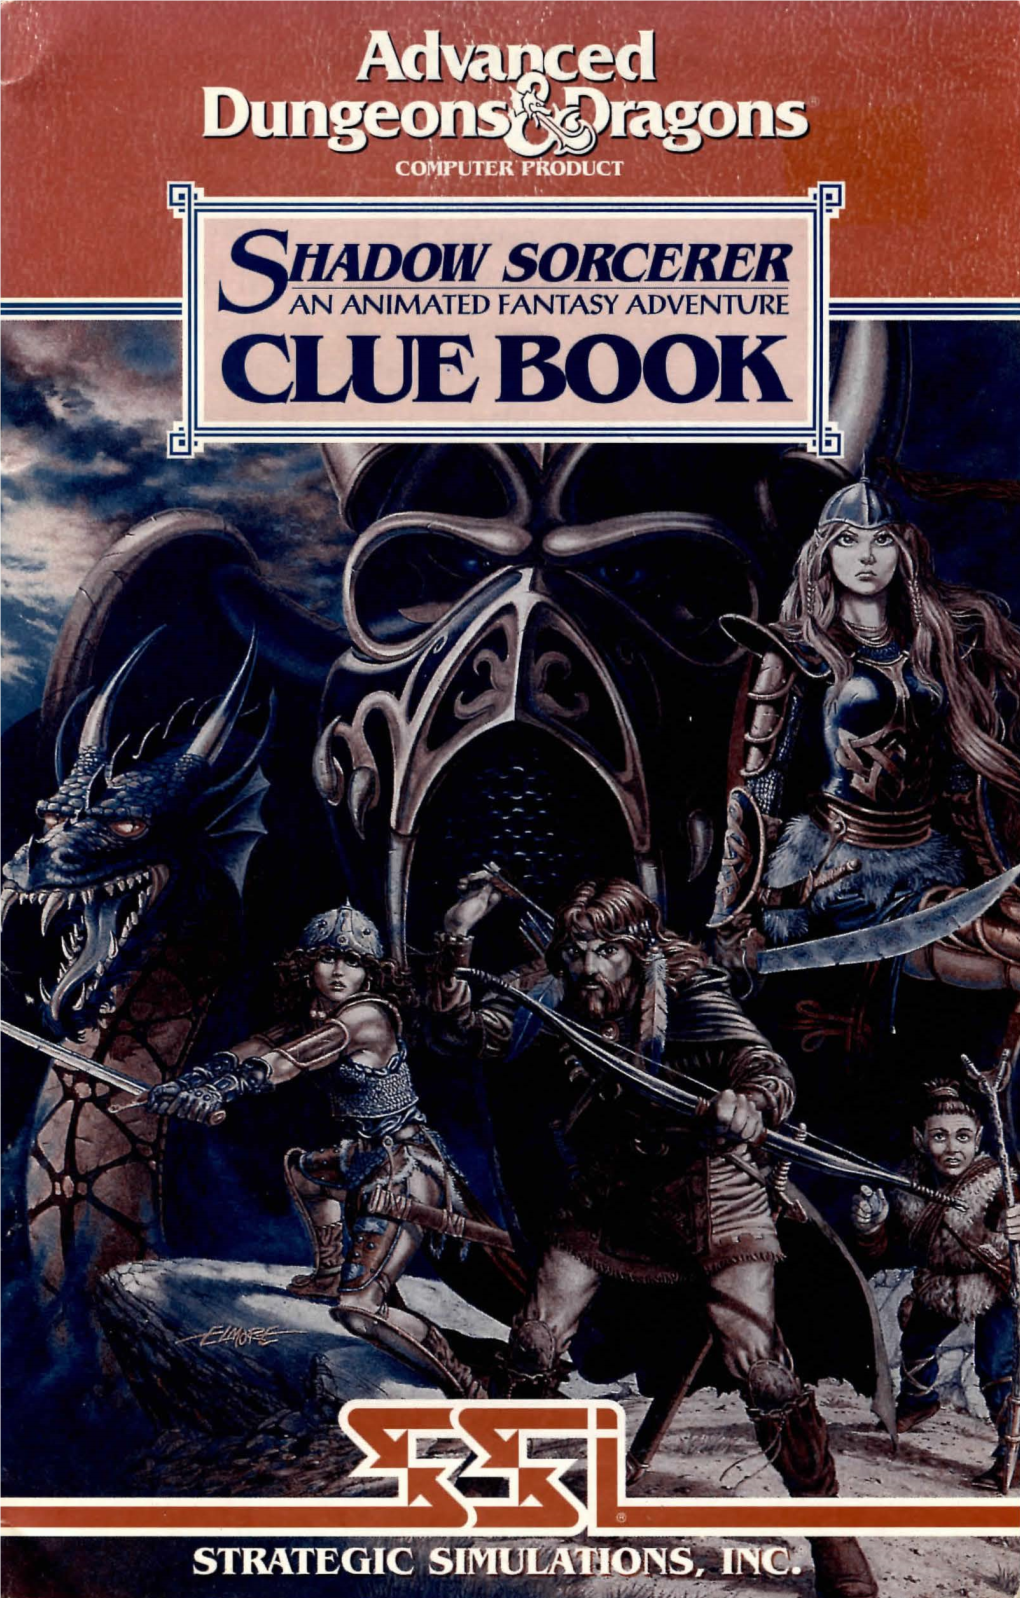 Clue Book Table of Contents